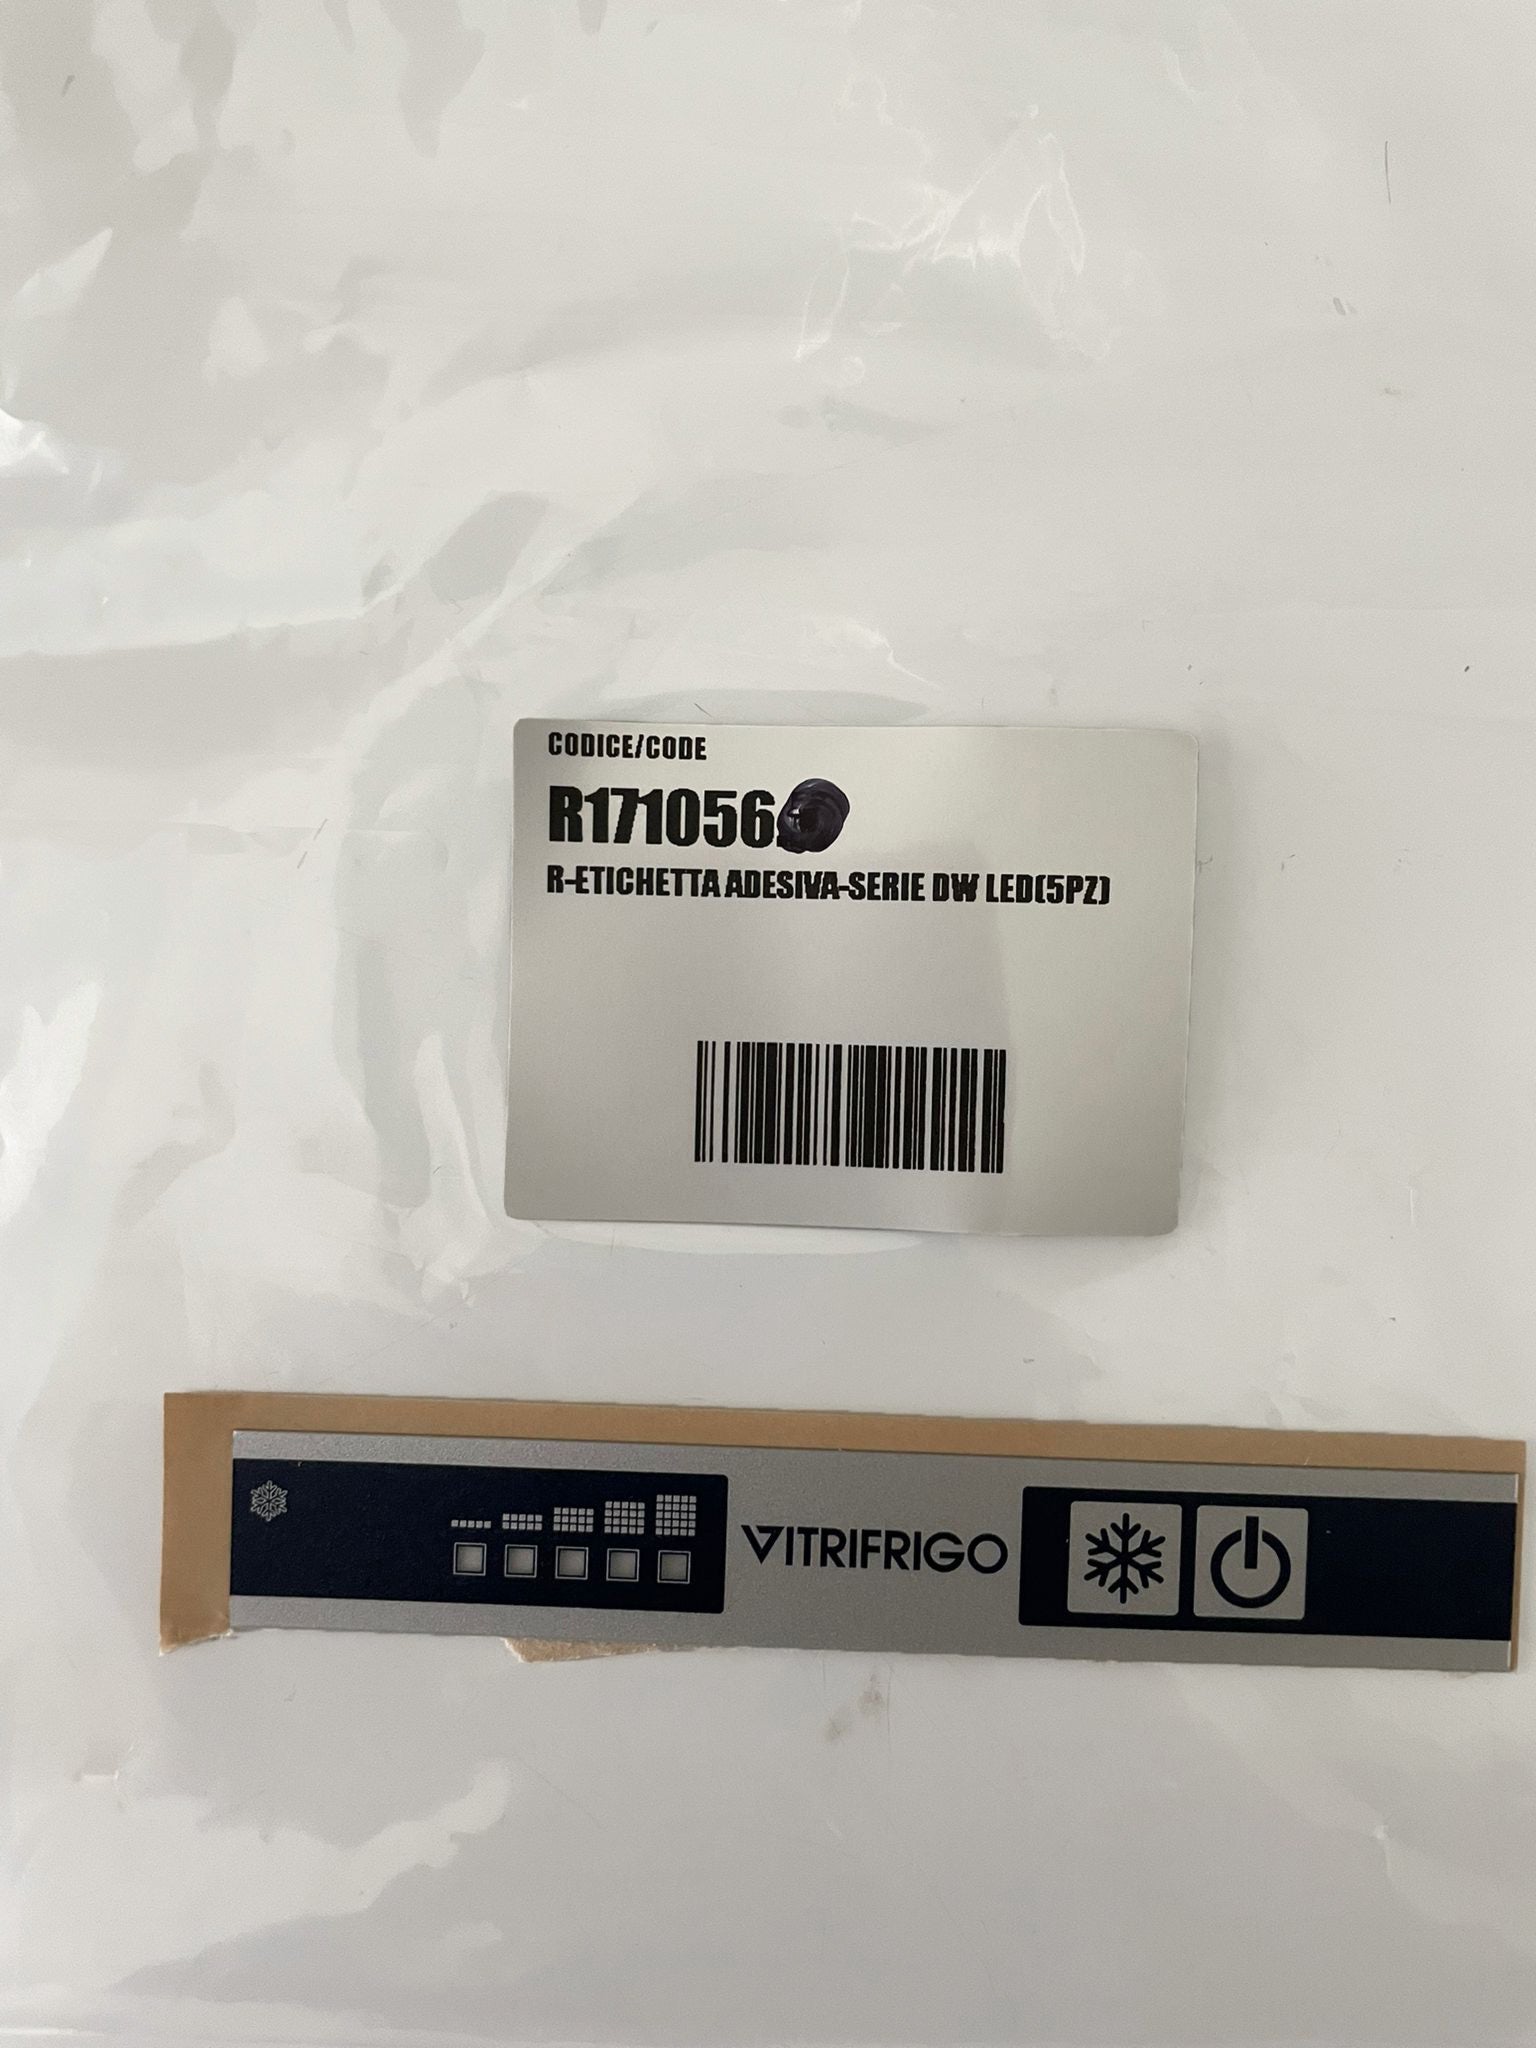 Vitrifrigo R171056 - Thermostat Membrane Sticker, Control Panel, Drawer Models Current  ALL DW models buttons are together right of lights